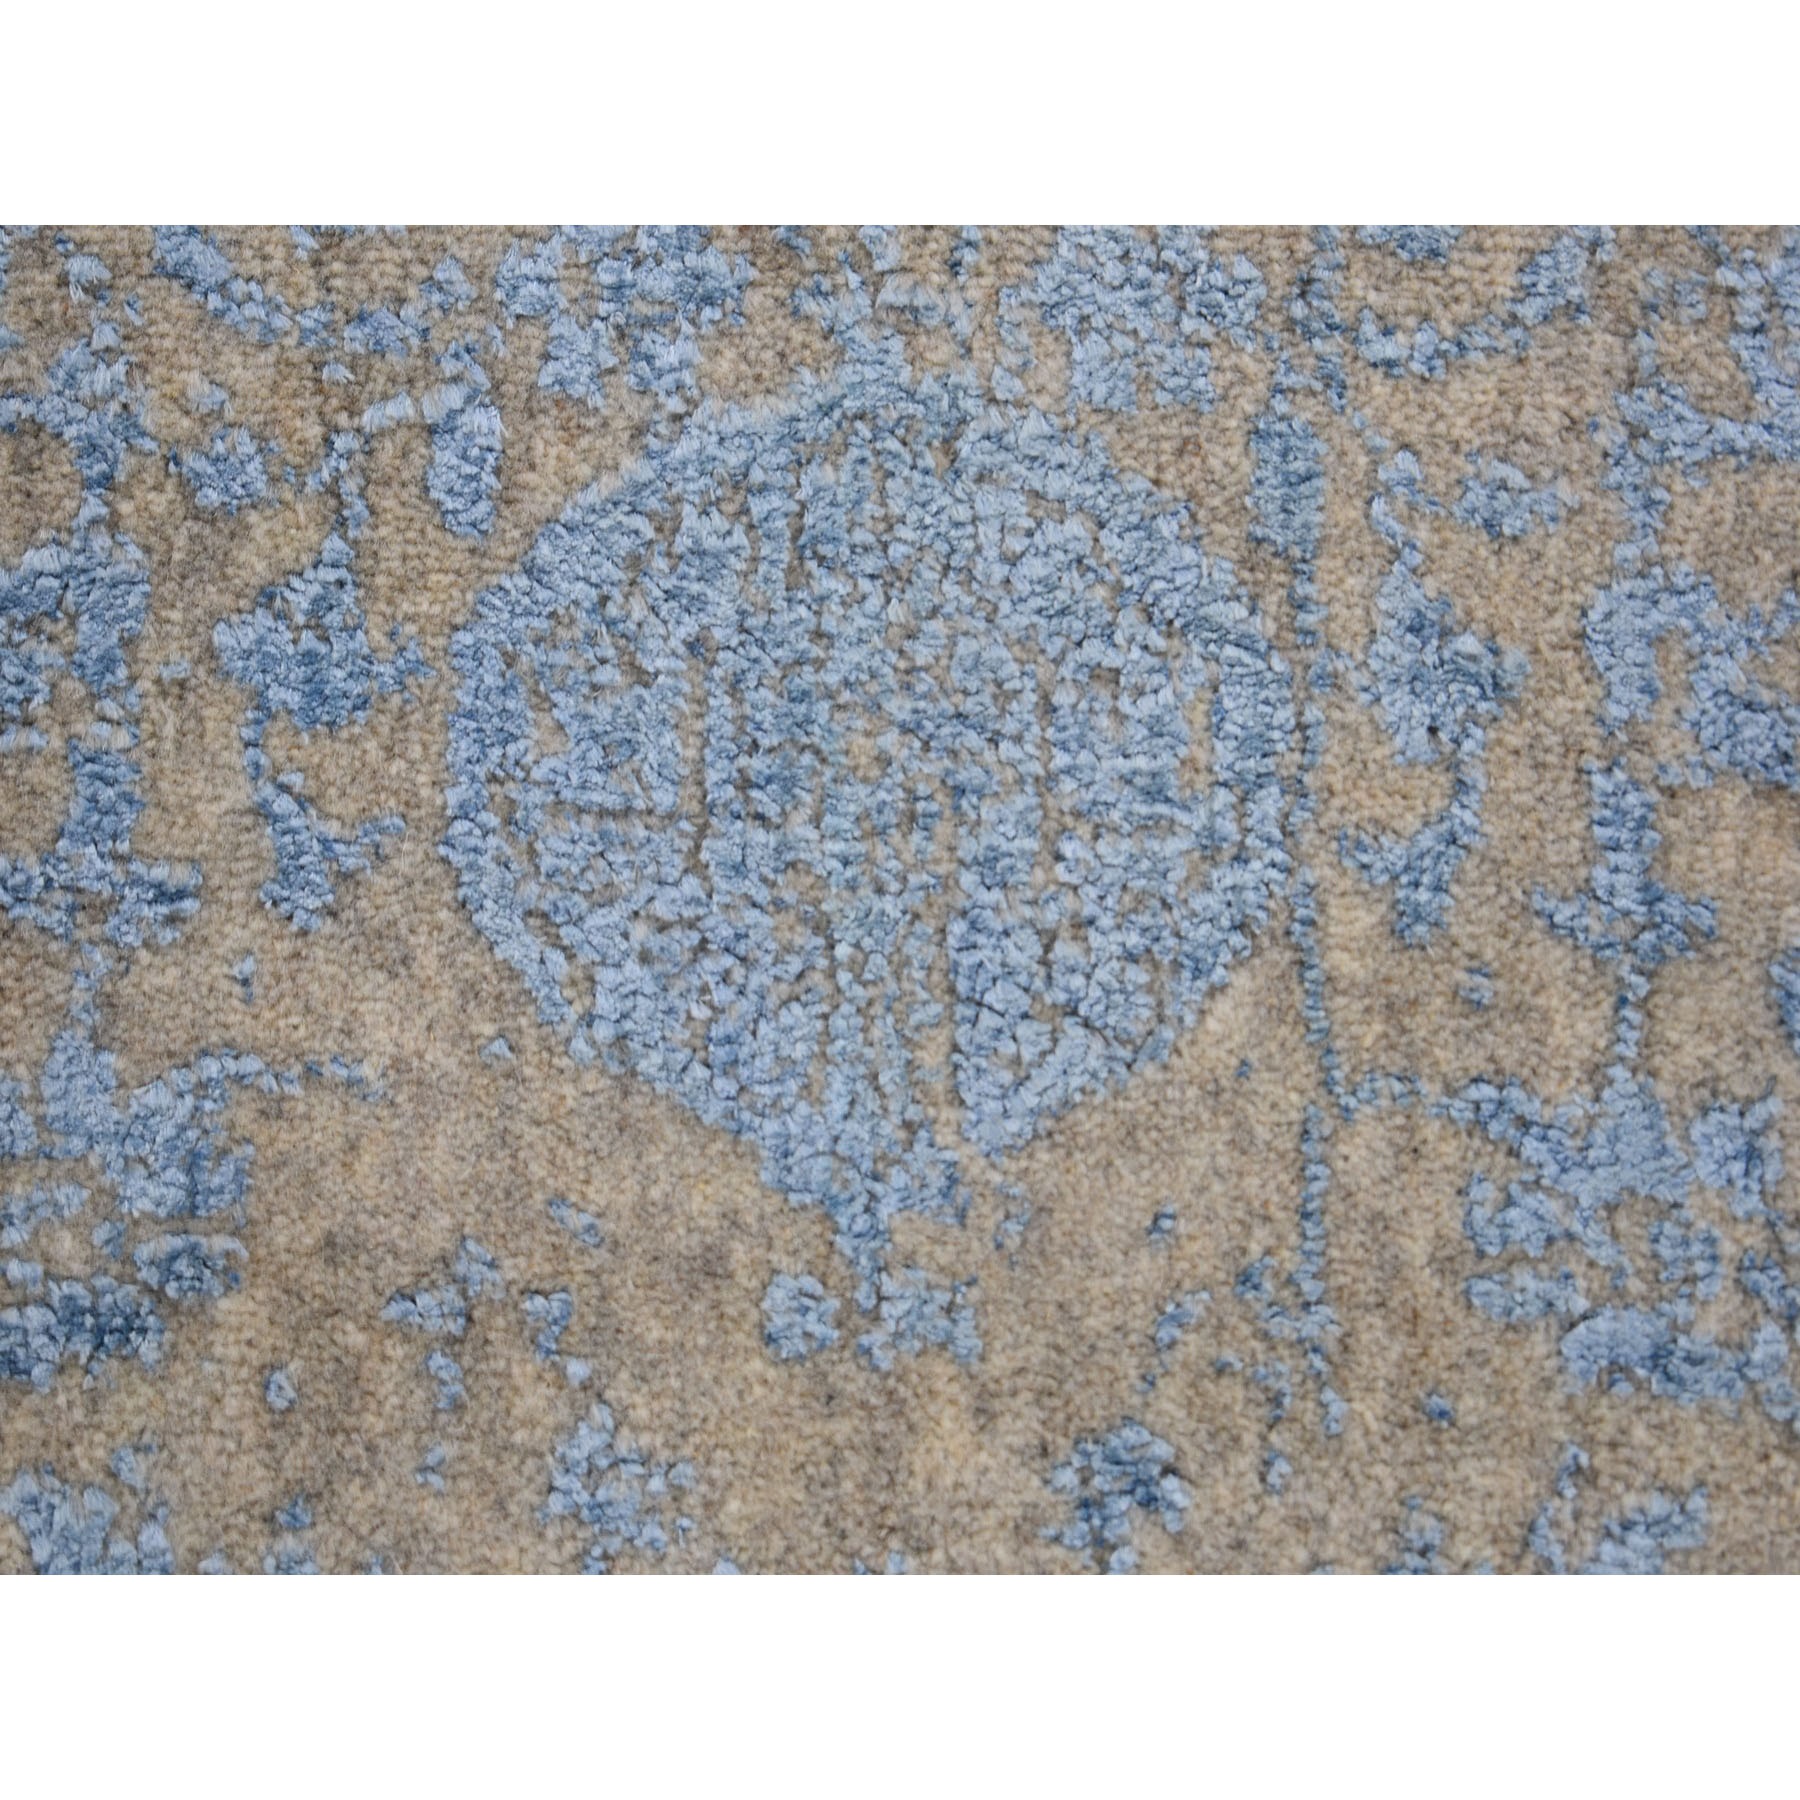 7-9 x7-9  Blue Jacquard Hand Loomed Wool and Art Silk Pomegranate Design Round Oriental Rug 